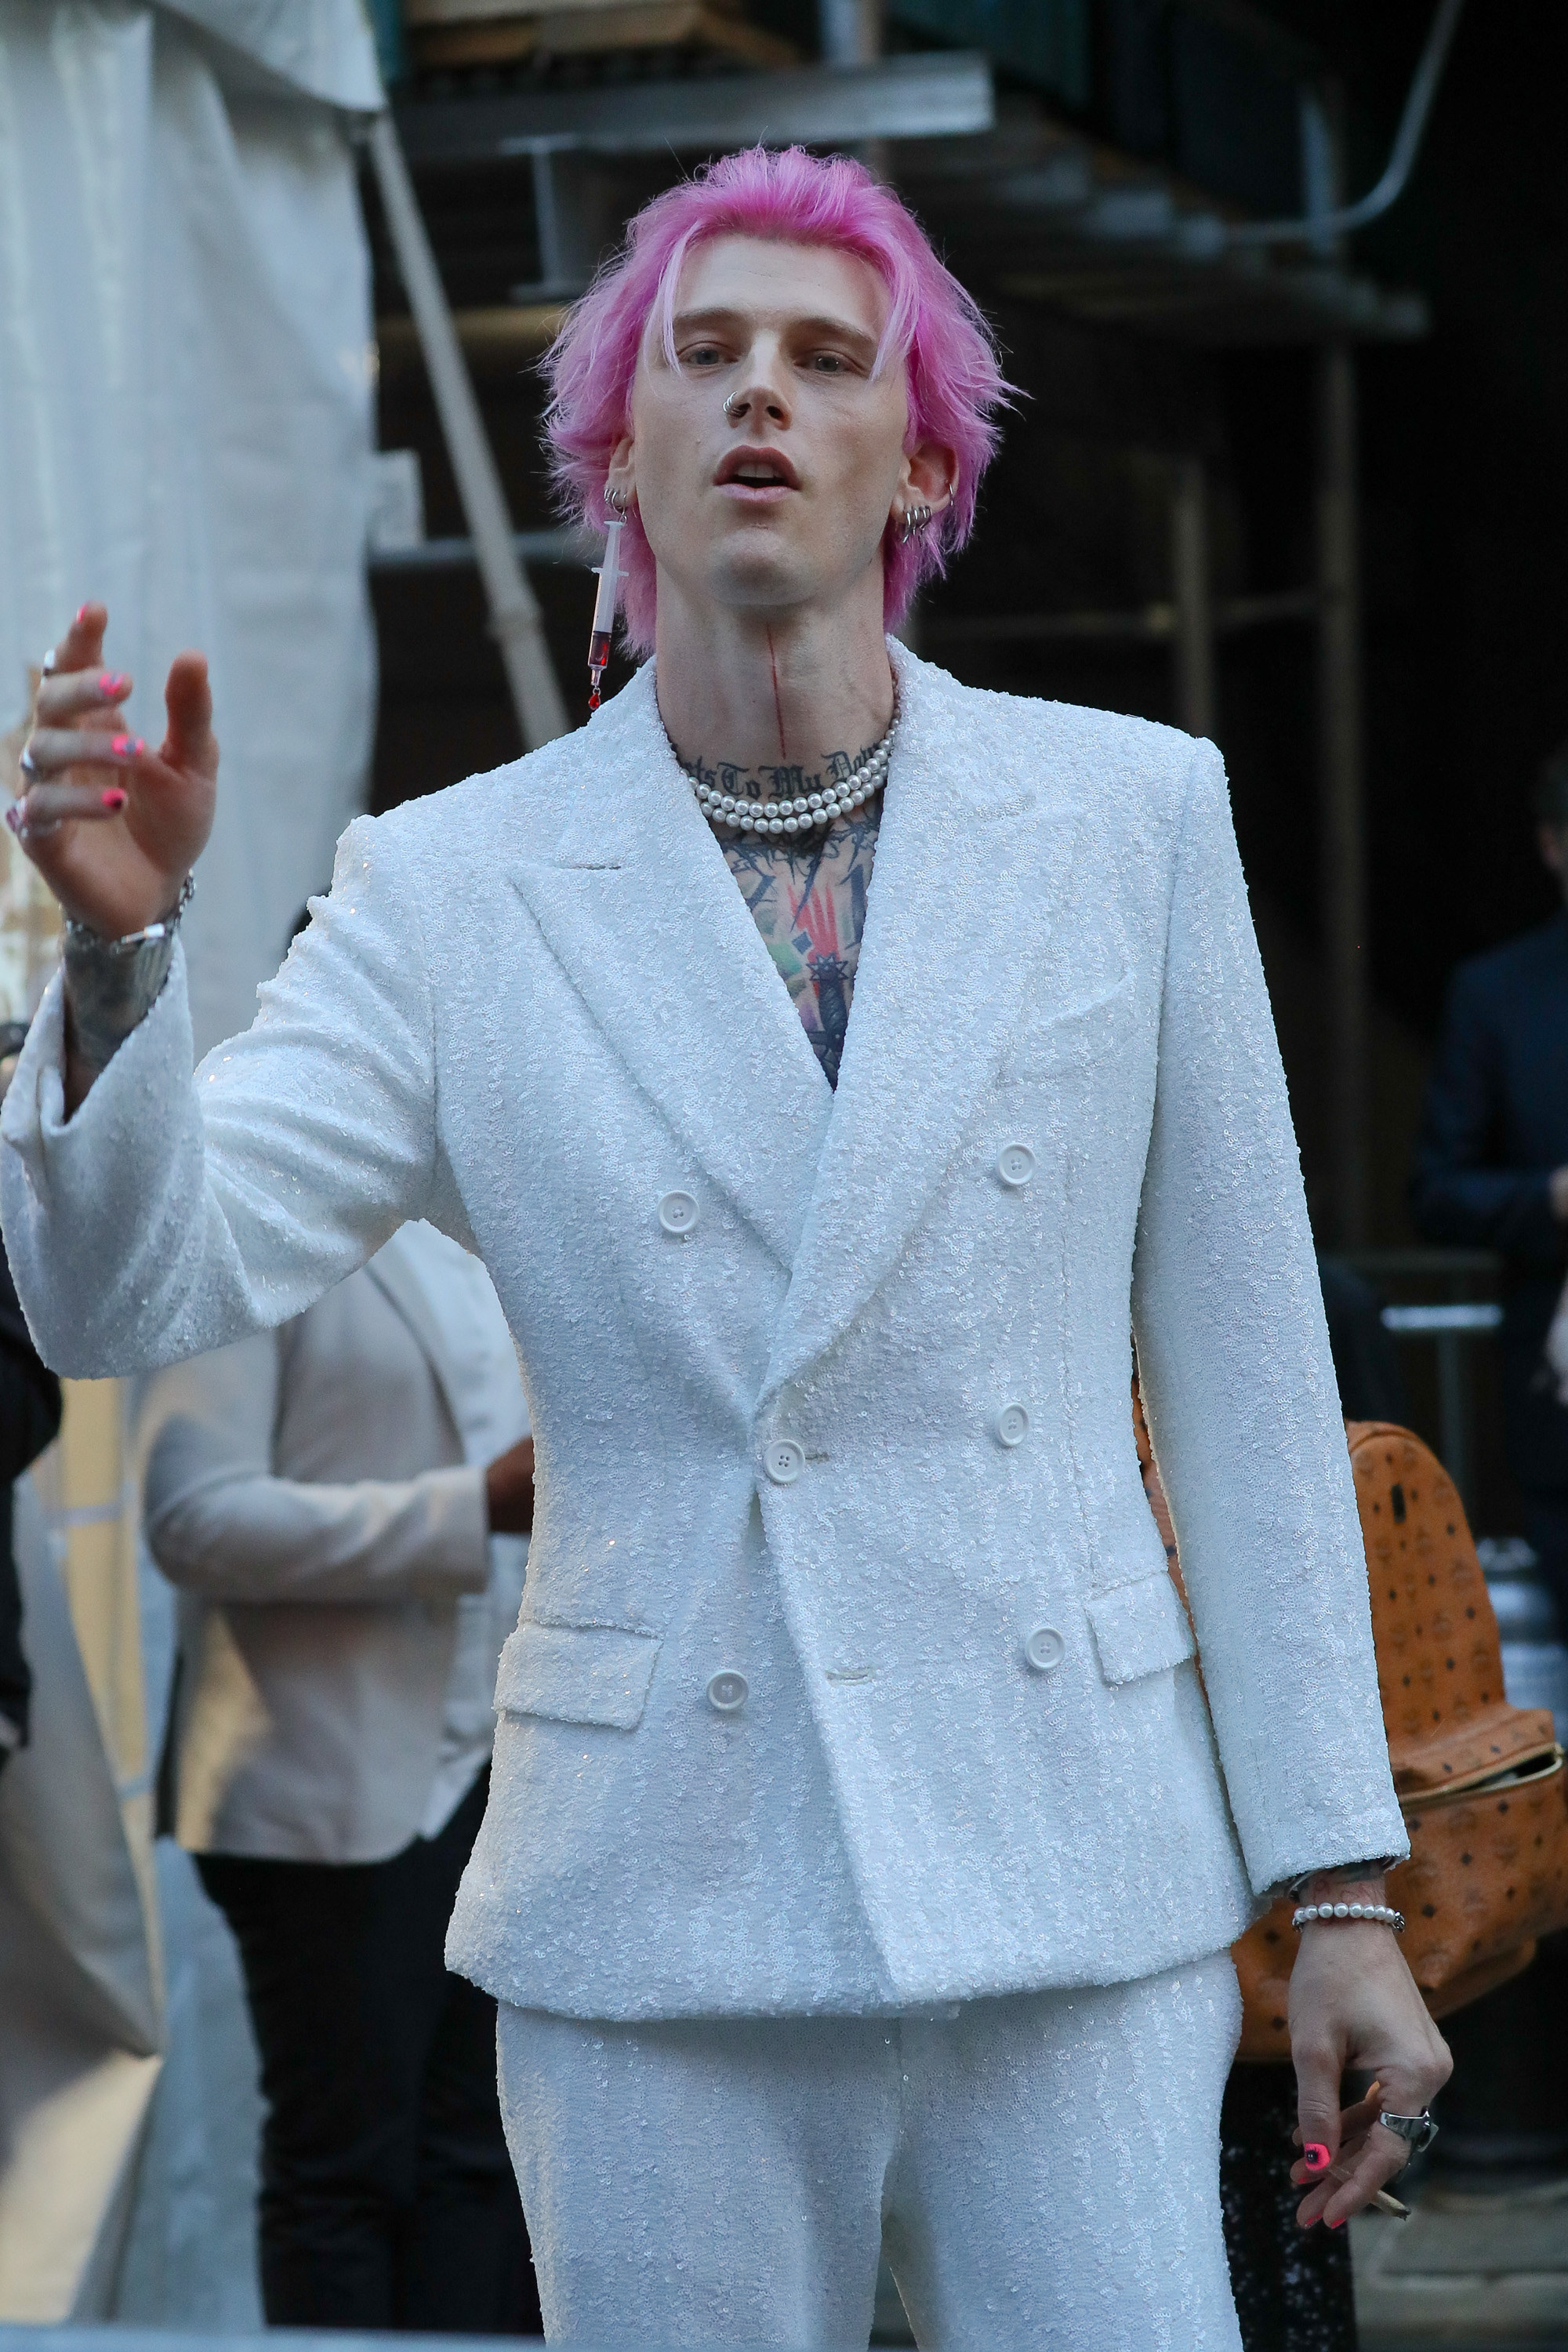 close up of MGK at the event